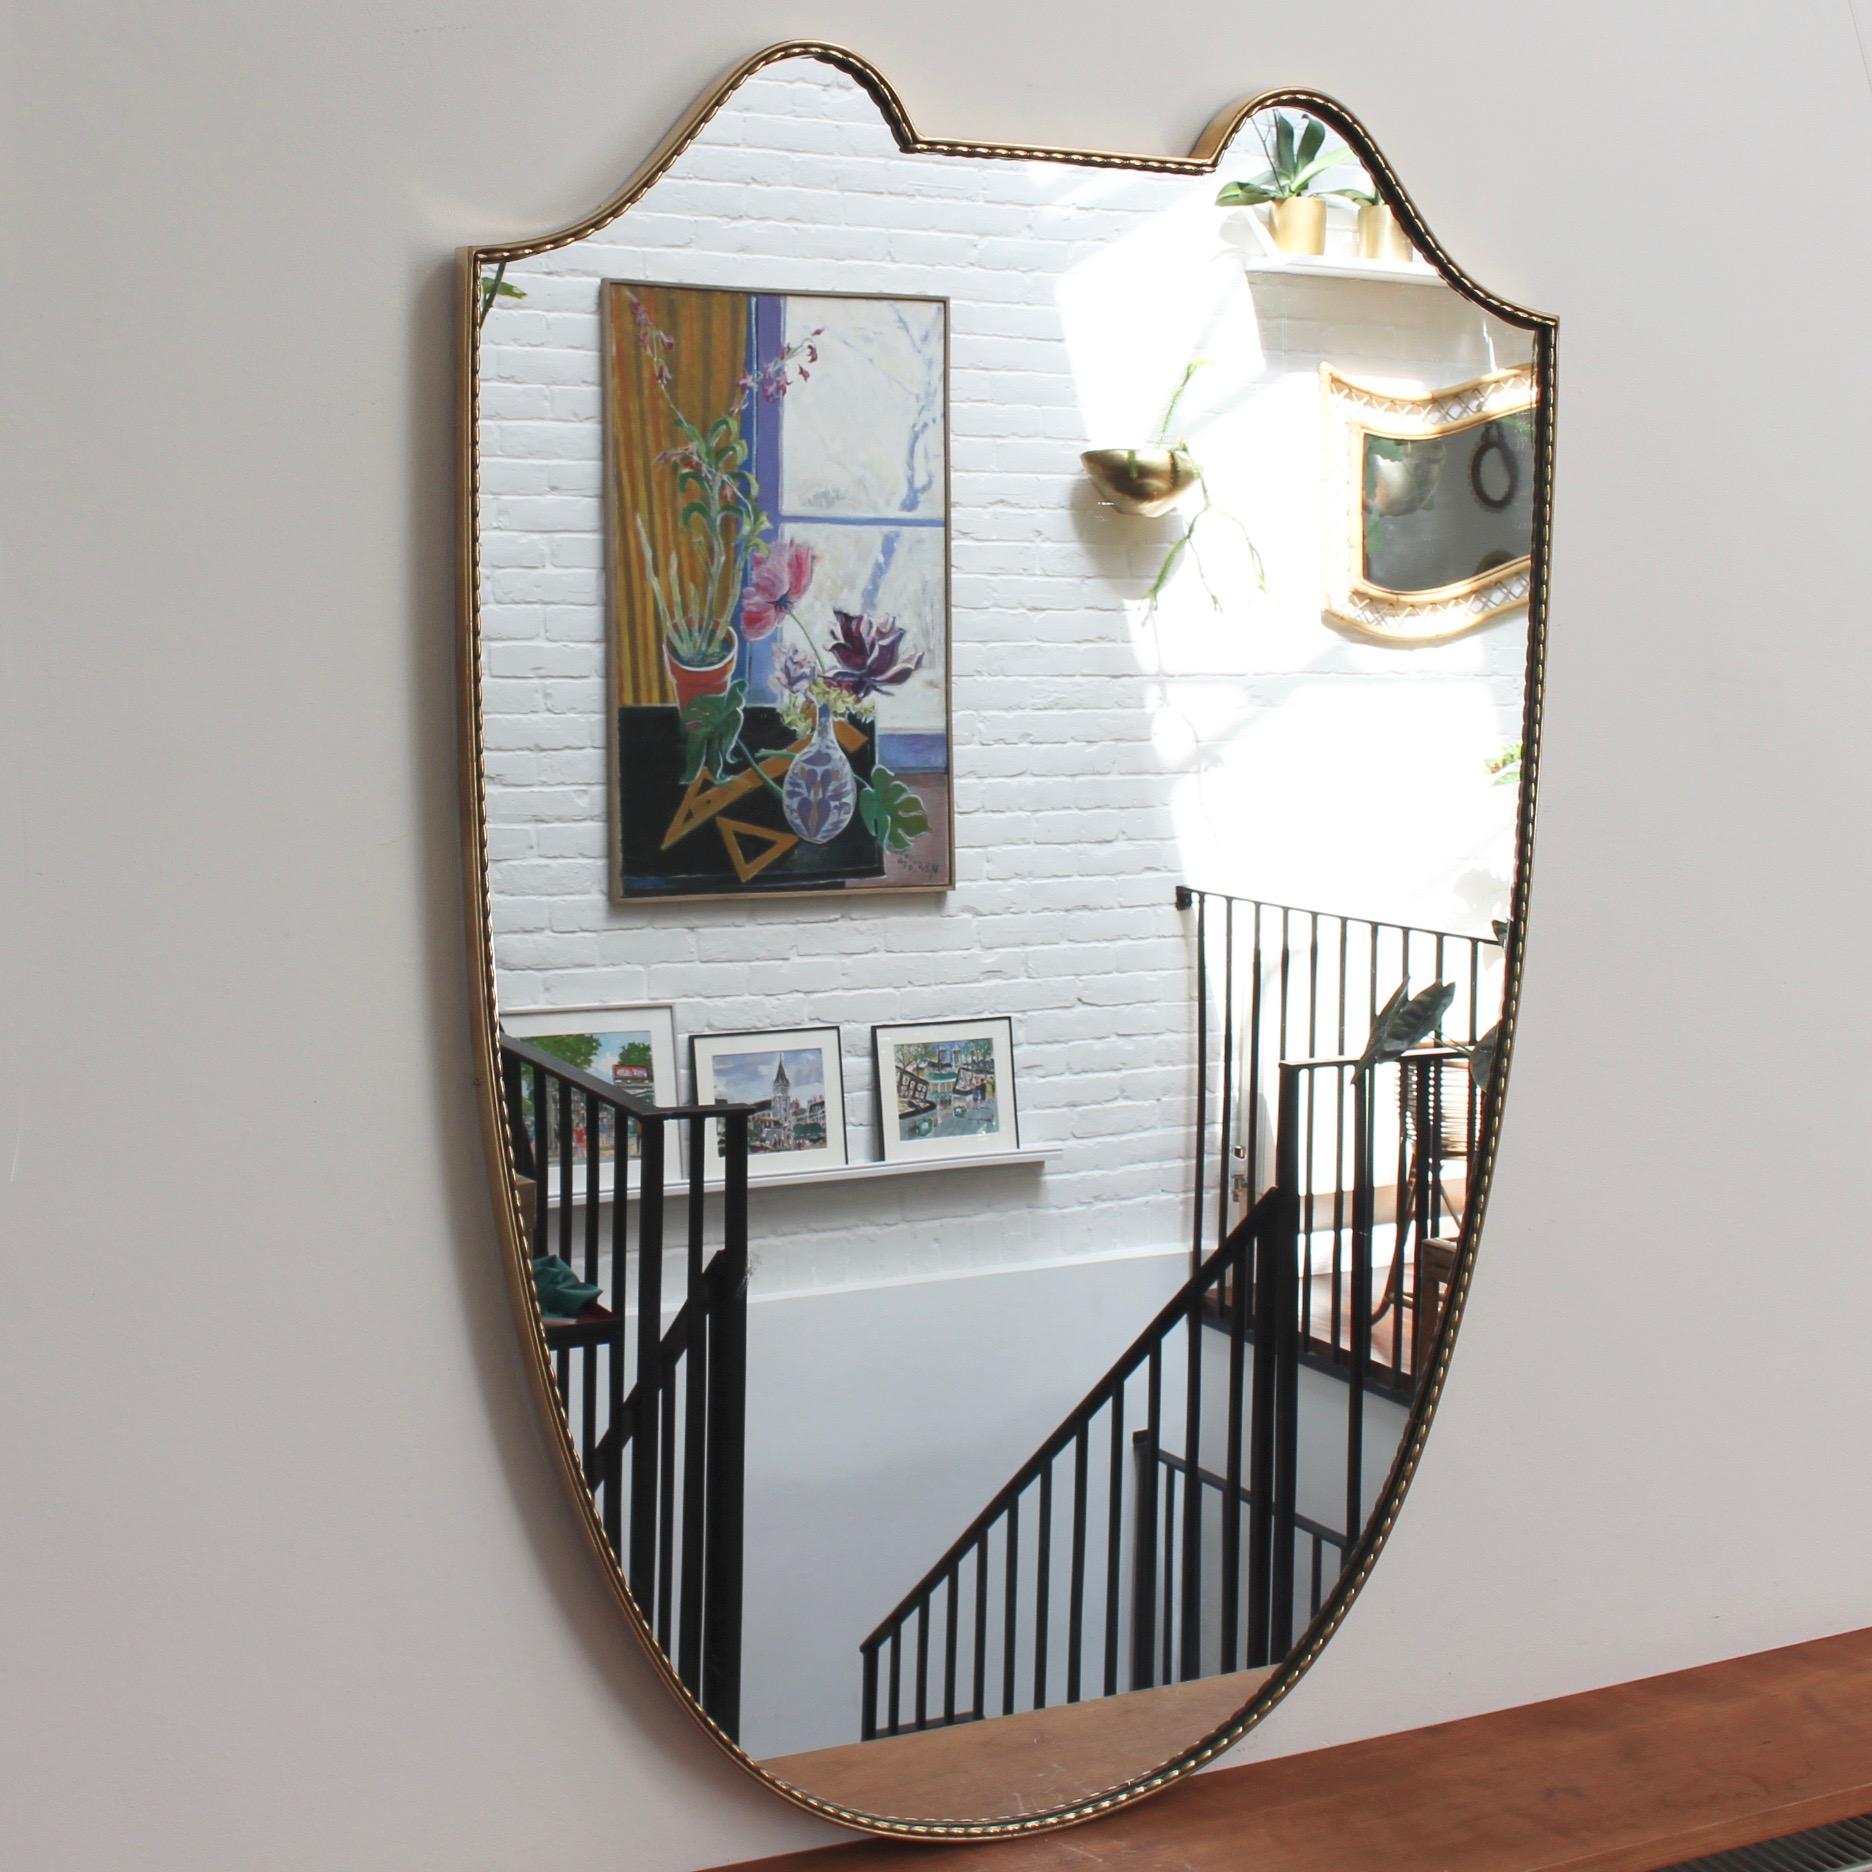 Large Mid-Century Italian wall mirror with brass frame (circa 1950s). This mirror has sensuous curves yet retains its solidity and imposing good looks. The crest-shape is topped by two rounded edges on either side and the frame has a distinctive